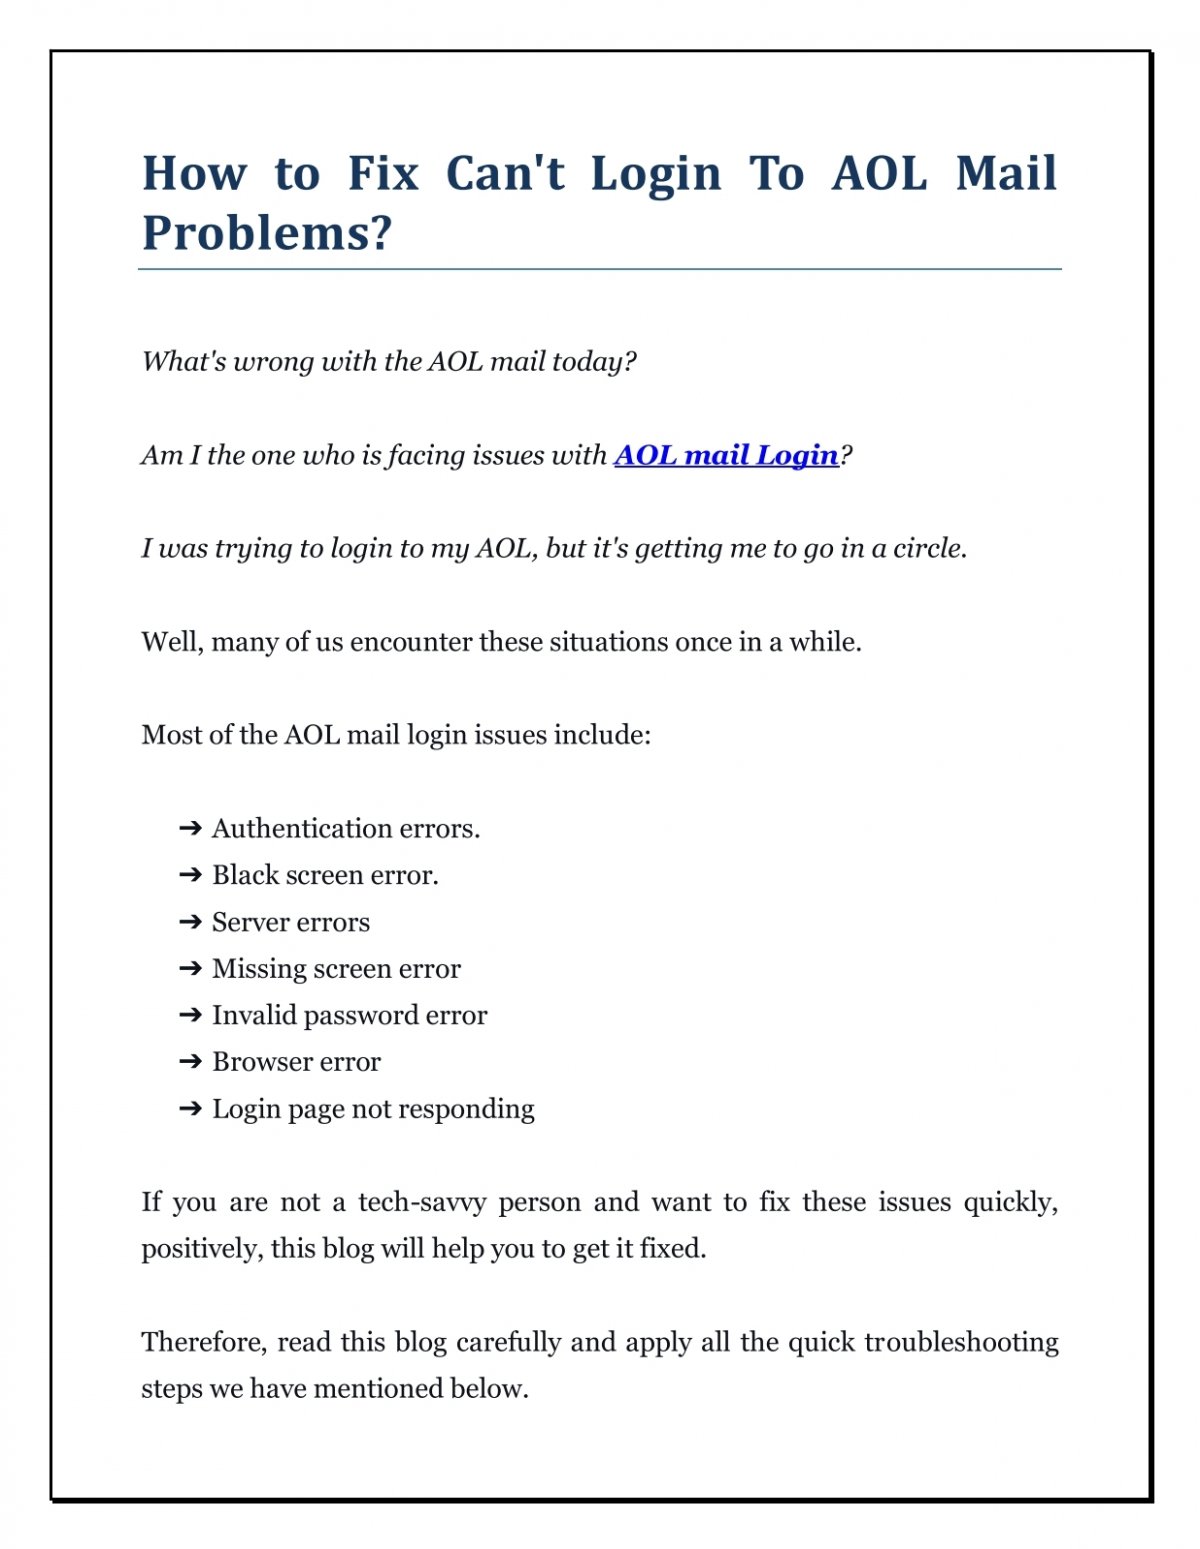 How To Fix Cant Login To Aol Mail Problems